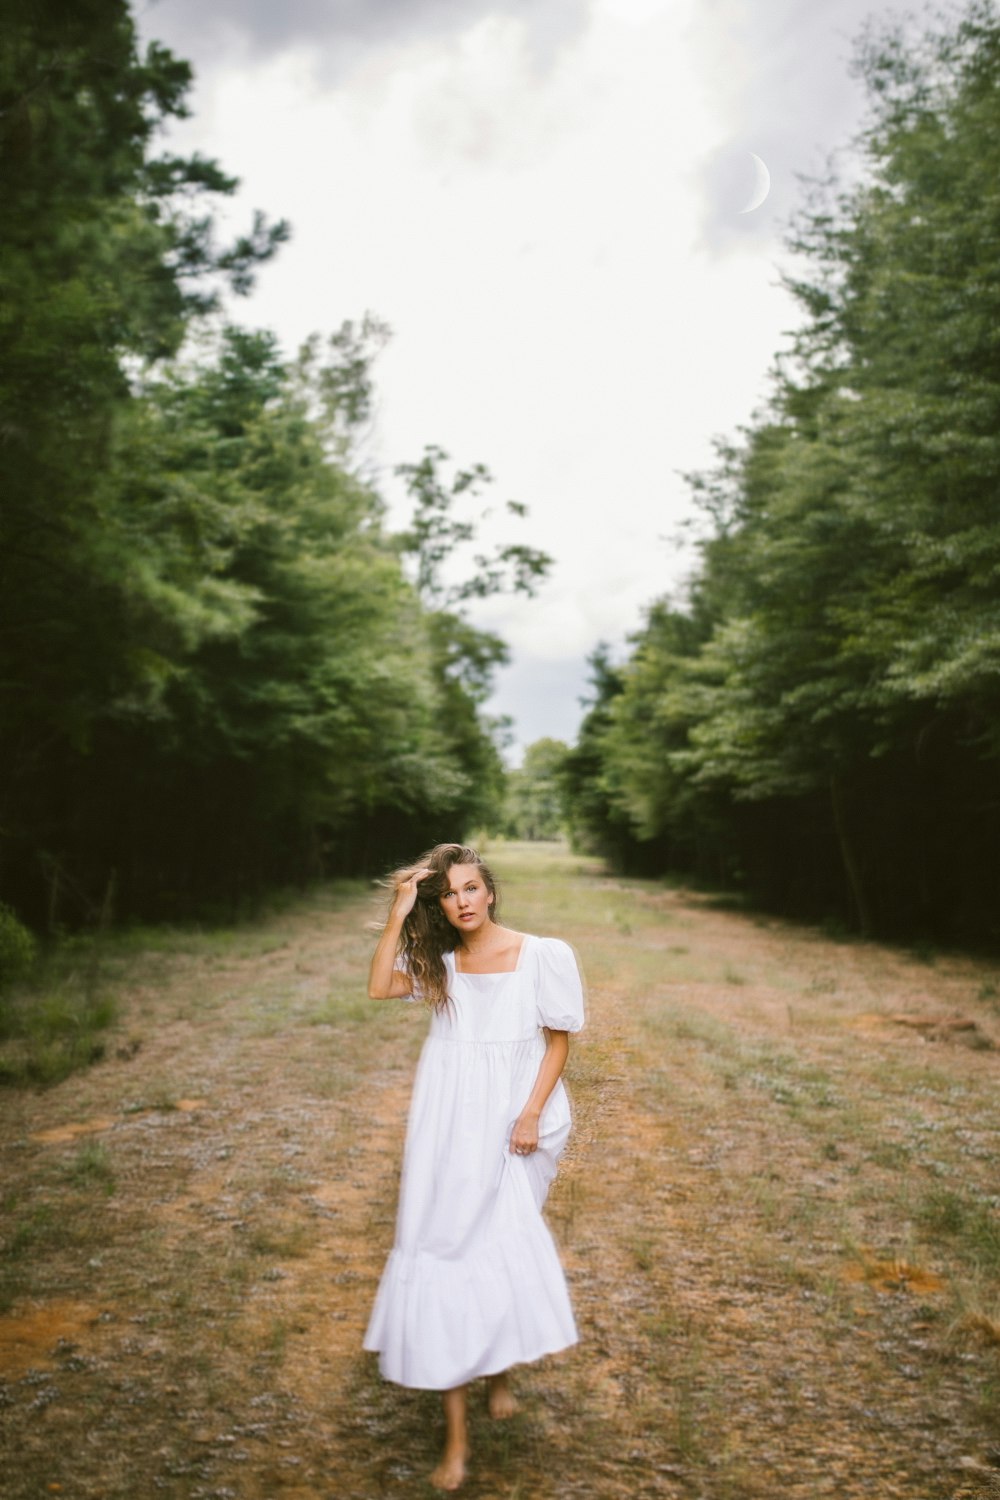 woman in white dress standing on dirt road between green trees during daytime